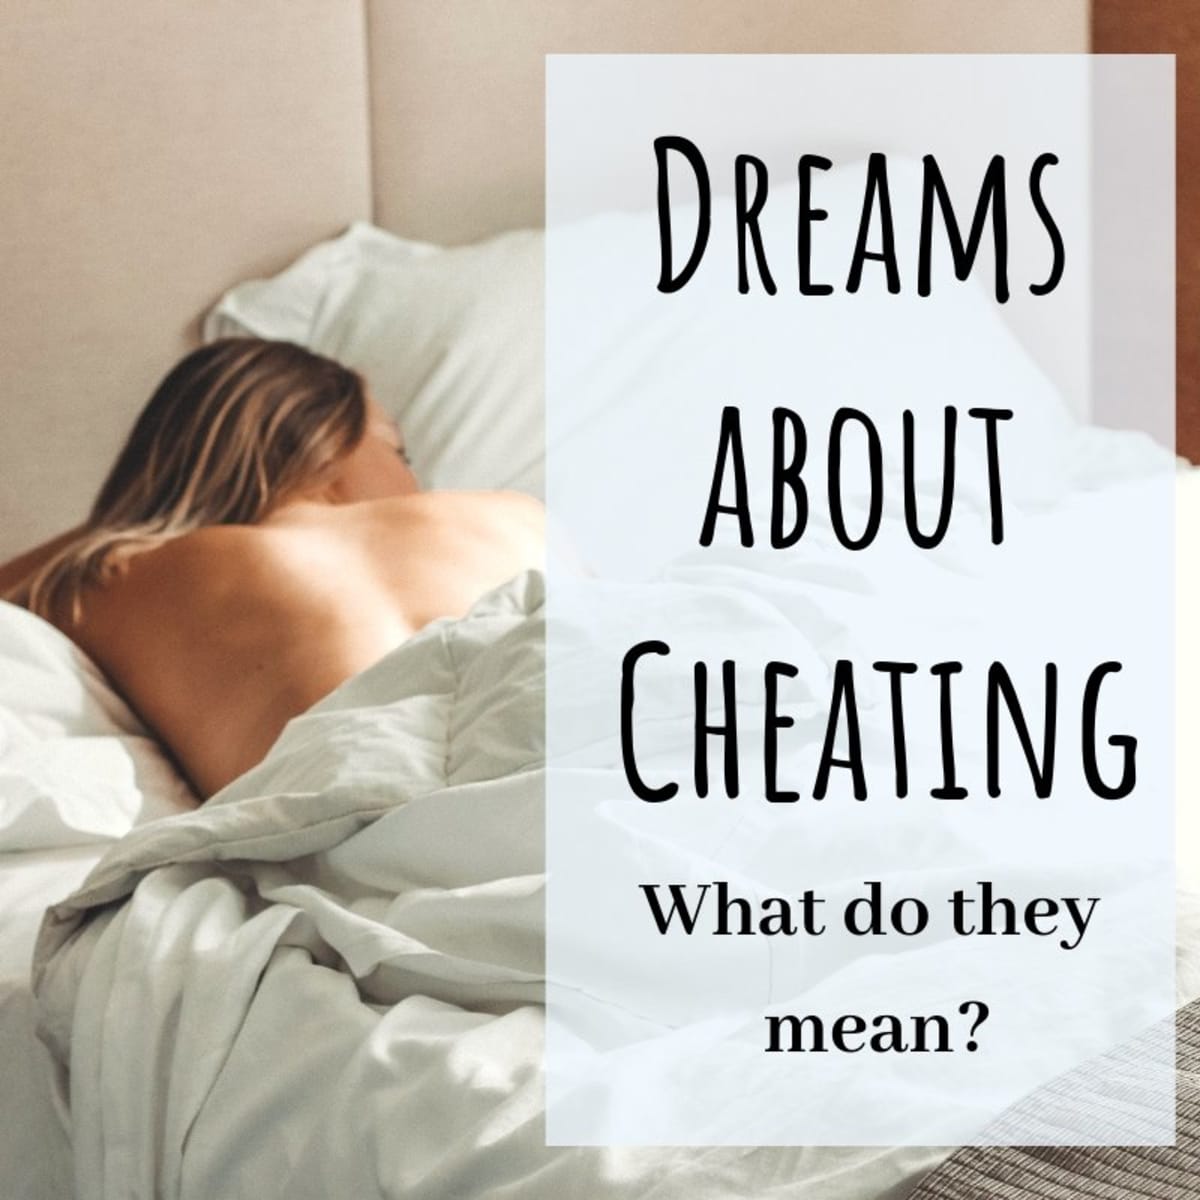 Wife cheating me. Cheating. Cheating husband while away. 9 Класс what do your Dreams mean. Korean Infidelity.